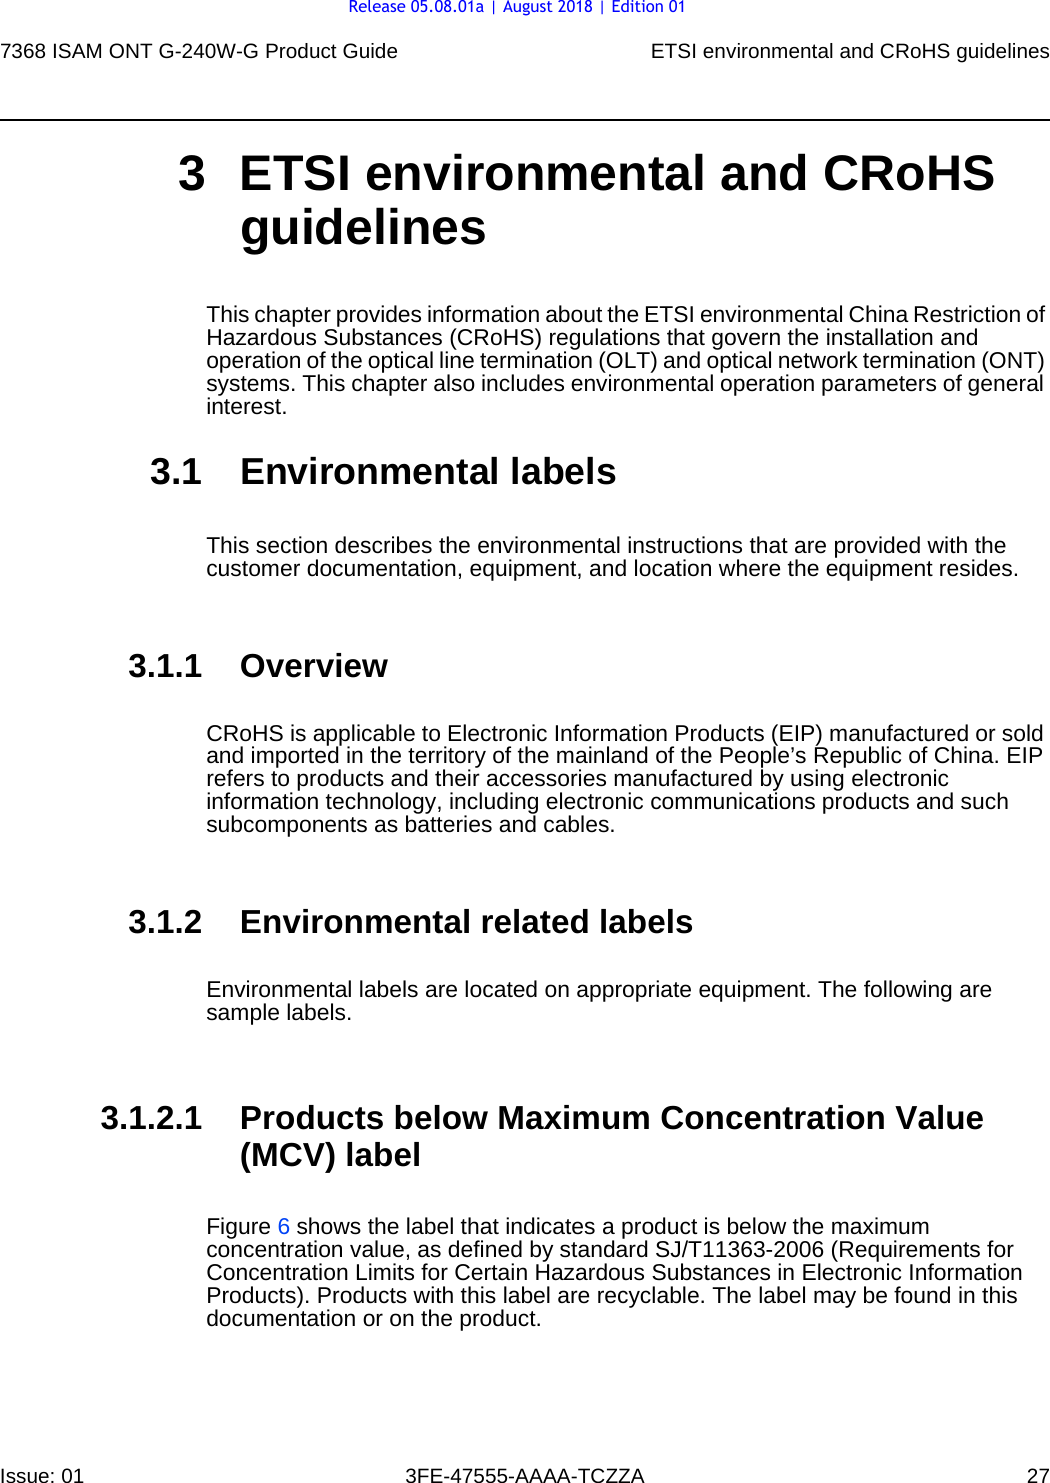 7368 ISAM ONT G-240W-G Product Guide ETSI environmental and CRoHS guidelinesIssue: 01 3FE-47555-AAAA-TCZZA 27 3 ETSI environmental and CRoHS guidelinesThis chapter provides information about the ETSI environmental China Restriction of Hazardous Substances (CRoHS) regulations that govern the installation and operation of the optical line termination (OLT) and optical network termination (ONT) systems. This chapter also includes environmental operation parameters of general interest.3.1 Environmental labelsThis section describes the environmental instructions that are provided with the customer documentation, equipment, and location where the equipment resides.3.1.1 OverviewCRoHS is applicable to Electronic Information Products (EIP) manufactured or sold and imported in the territory of the mainland of the People’s Republic of China. EIP refers to products and their accessories manufactured by using electronic information technology, including electronic communications products and such subcomponents as batteries and cables.3.1.2 Environmental related labelsEnvironmental labels are located on appropriate equipment. The following are sample labels.3.1.2.1 Products below Maximum Concentration Value (MCV) labelFigure 6 shows the label that indicates a product is below the maximum concentration value, as defined by standard SJ/T11363-2006 (Requirements for Concentration Limits for Certain Hazardous Substances in Electronic Information Products). Products with this label are recyclable. The label may be found in this documentation or on the product.Release 05.08.01a | August 2018 | Edition 01